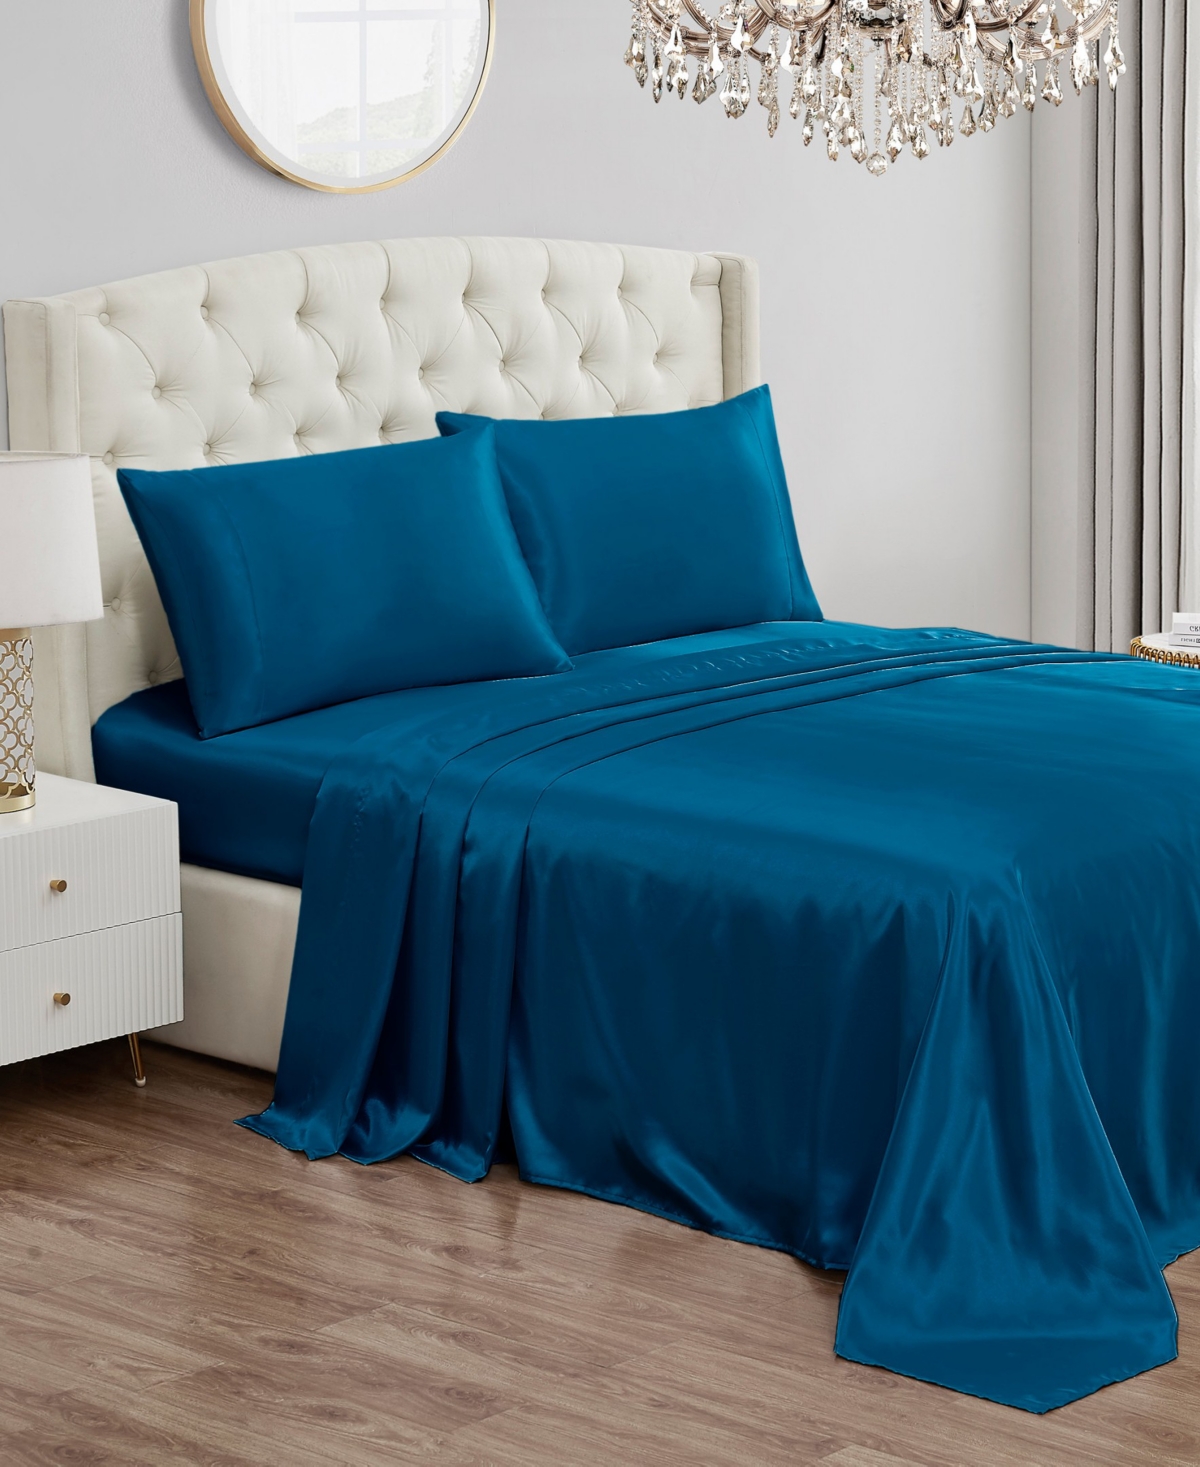 Juicy Couture Satin 4 Piece Sheet Set, King In Blue